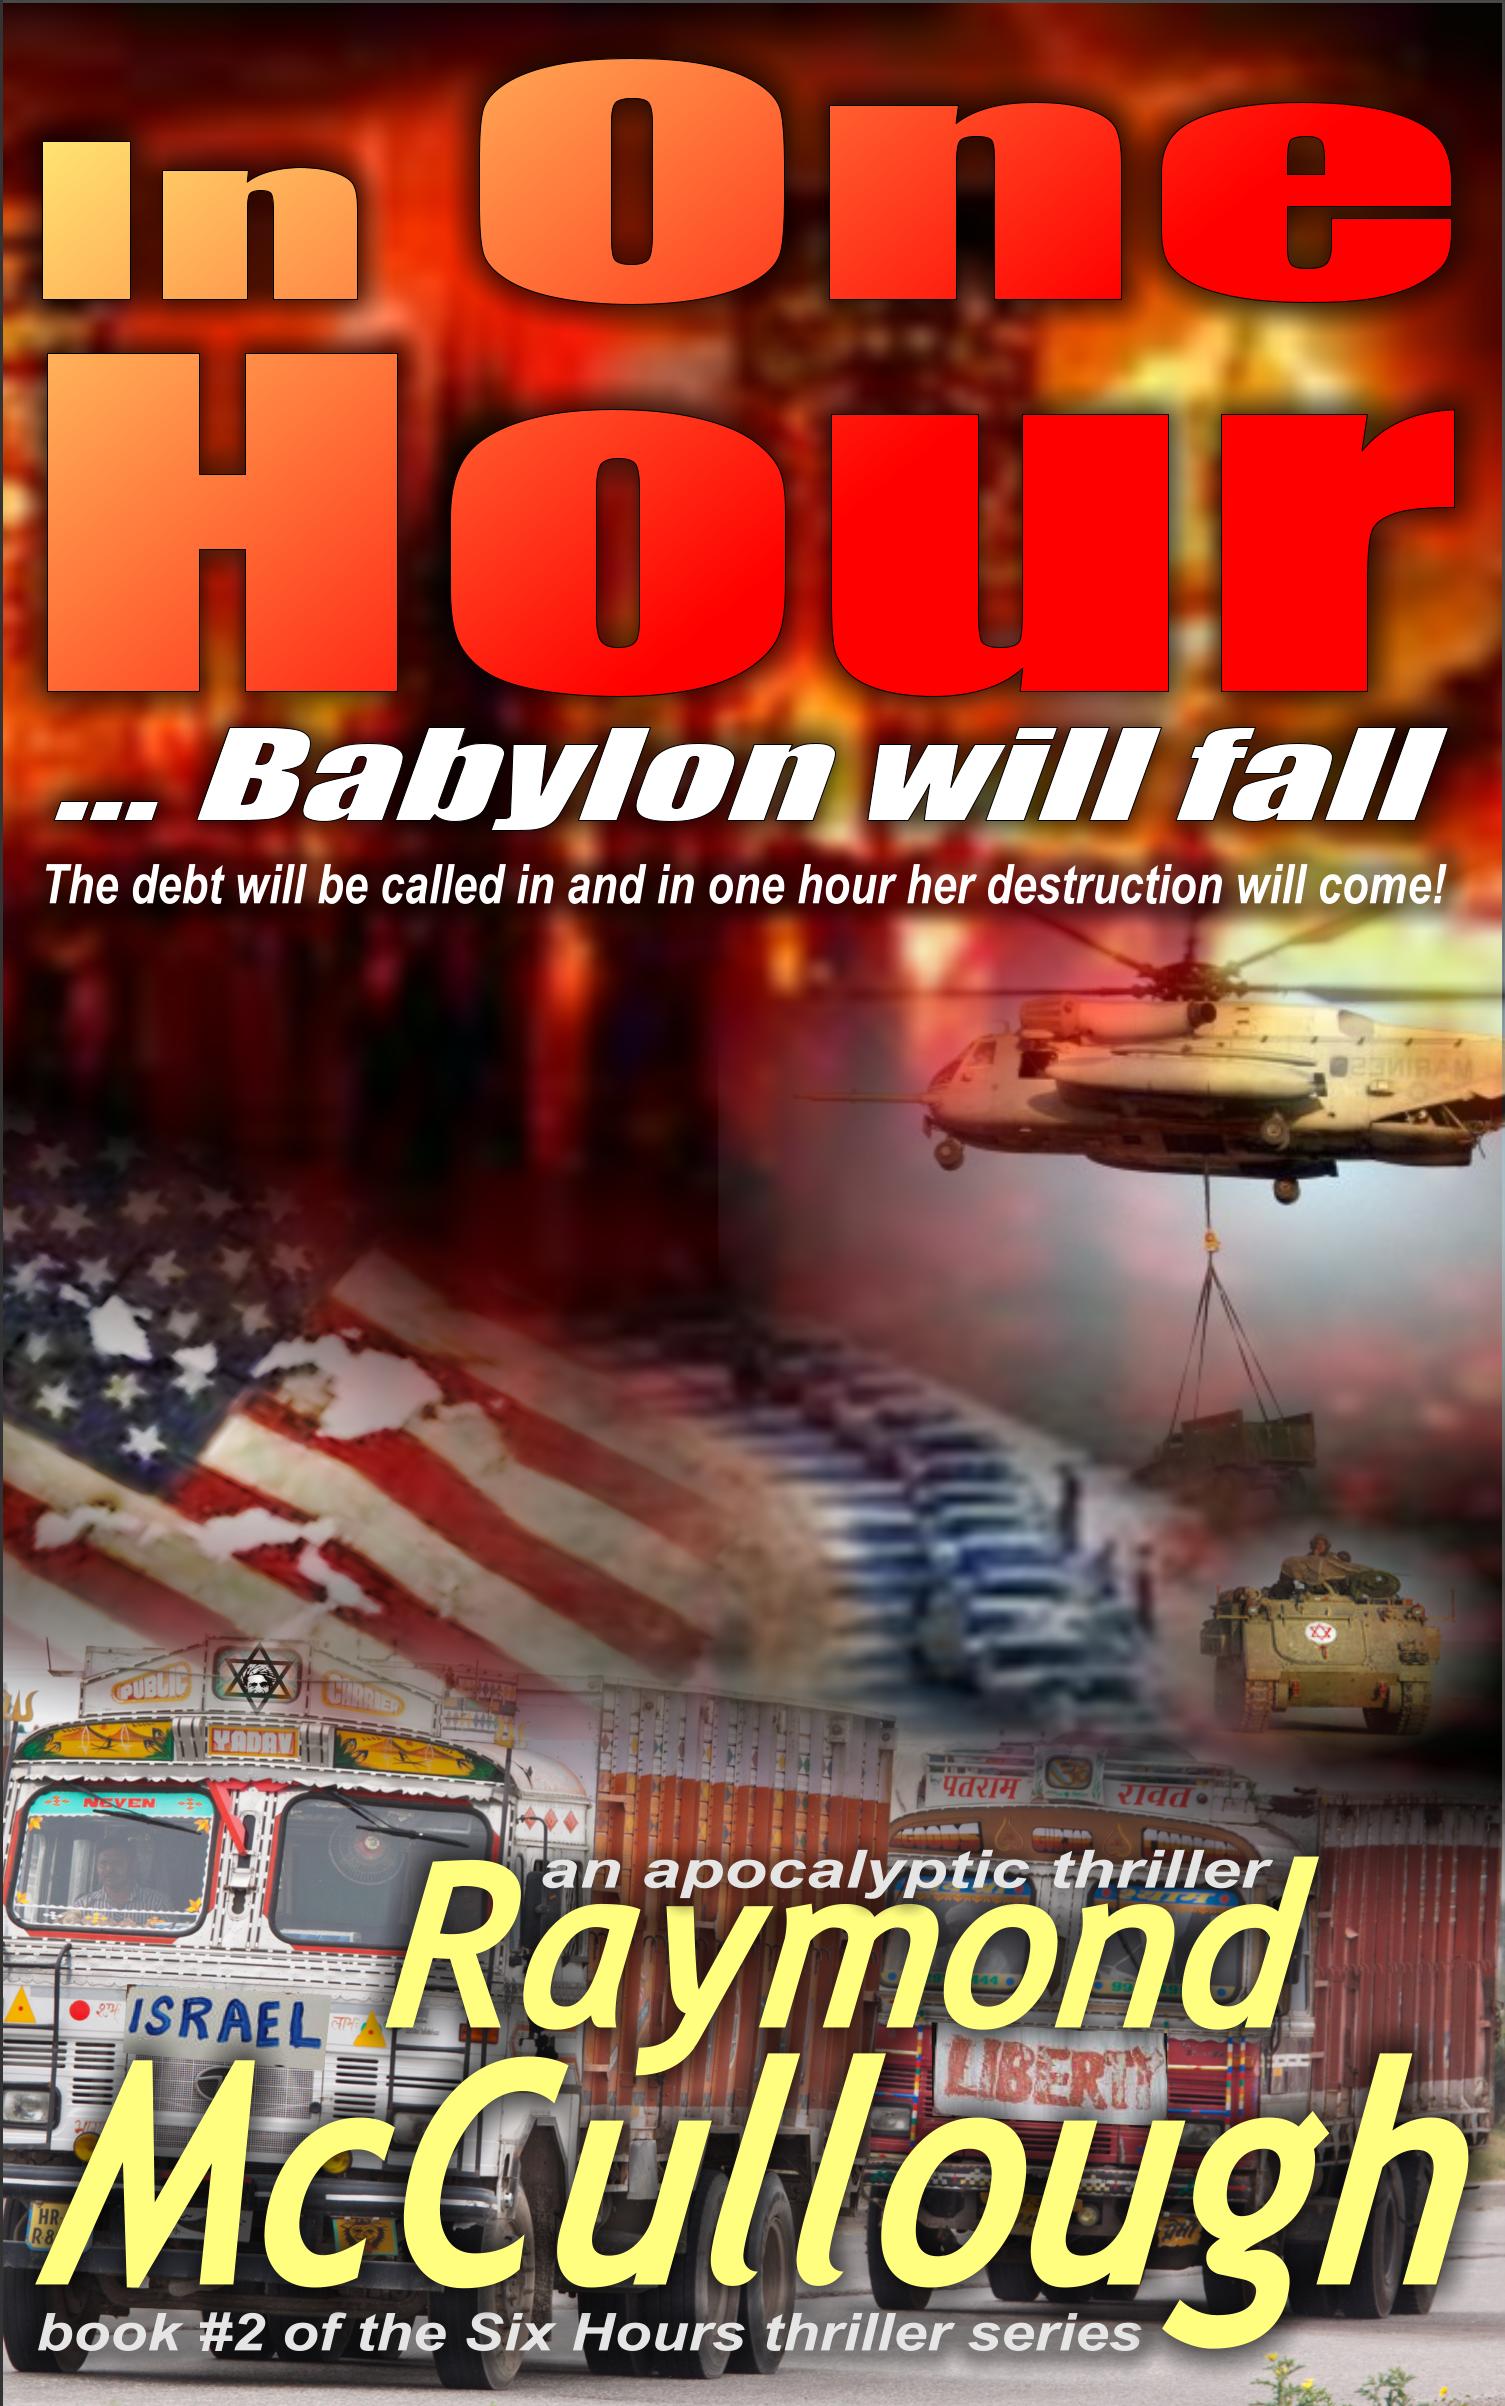 Book: 'In One Hour .. Babylon will fall' – The debt will be called in and in one hour her destruction will come – and the world – will change forever